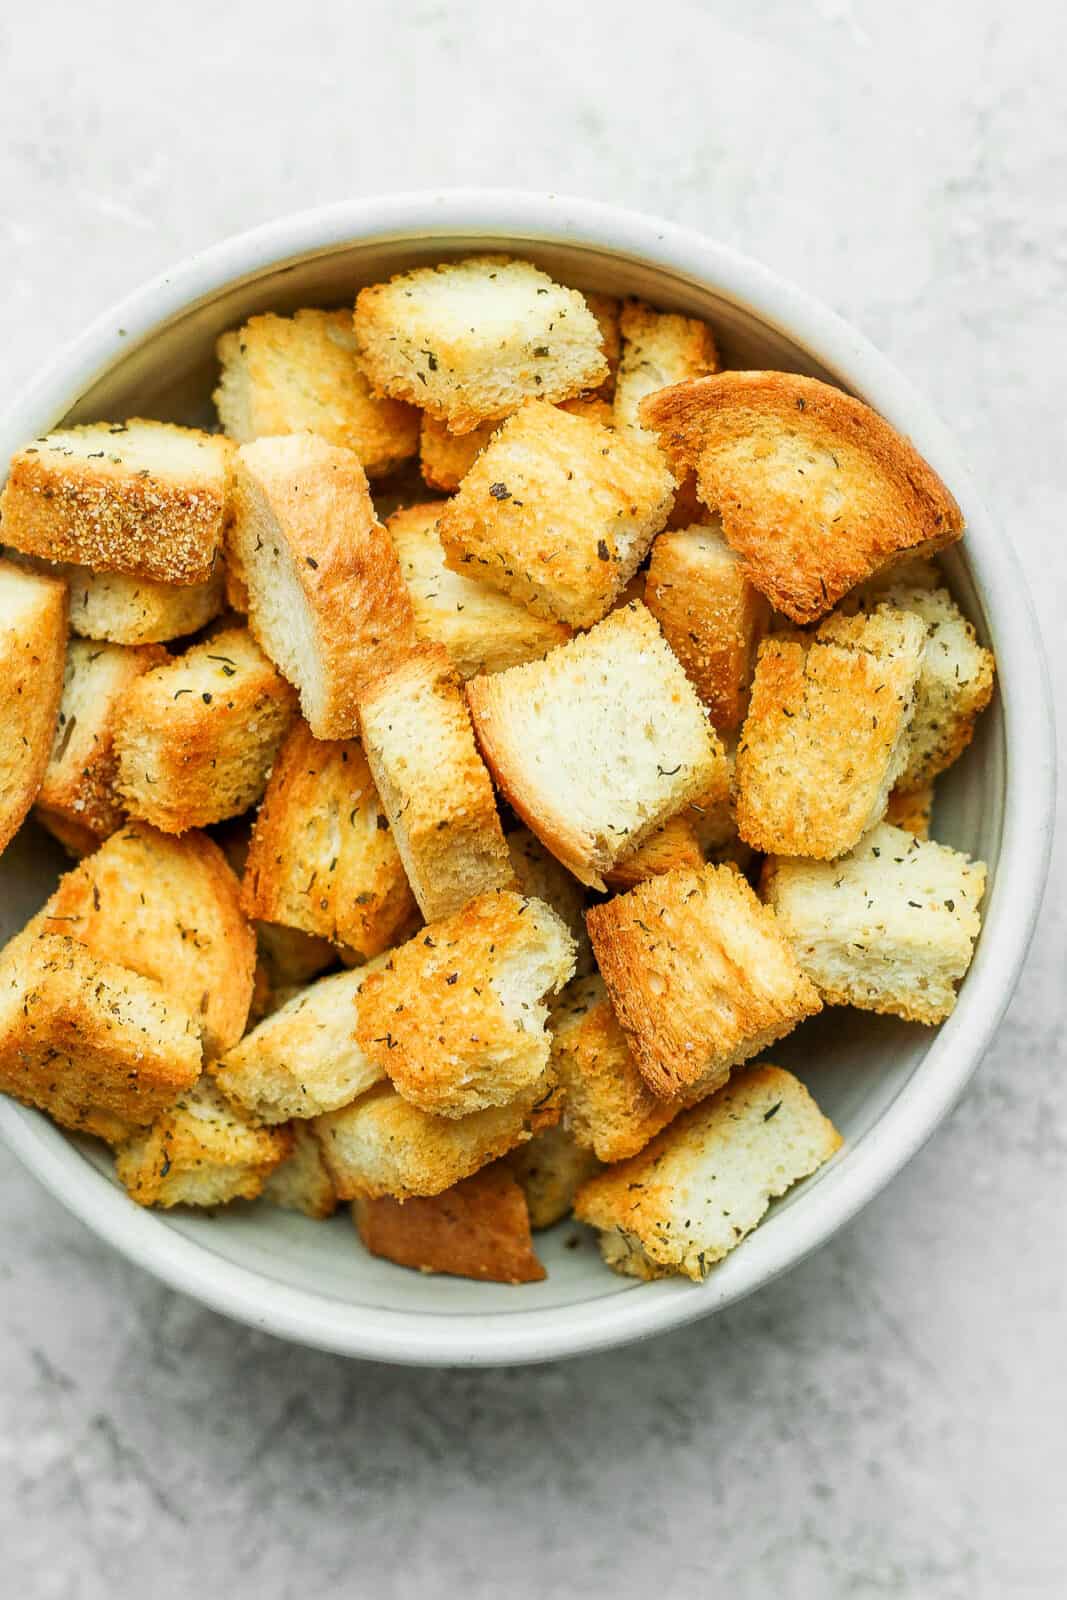 A bowl of homemade croutons that were baked in the oven.